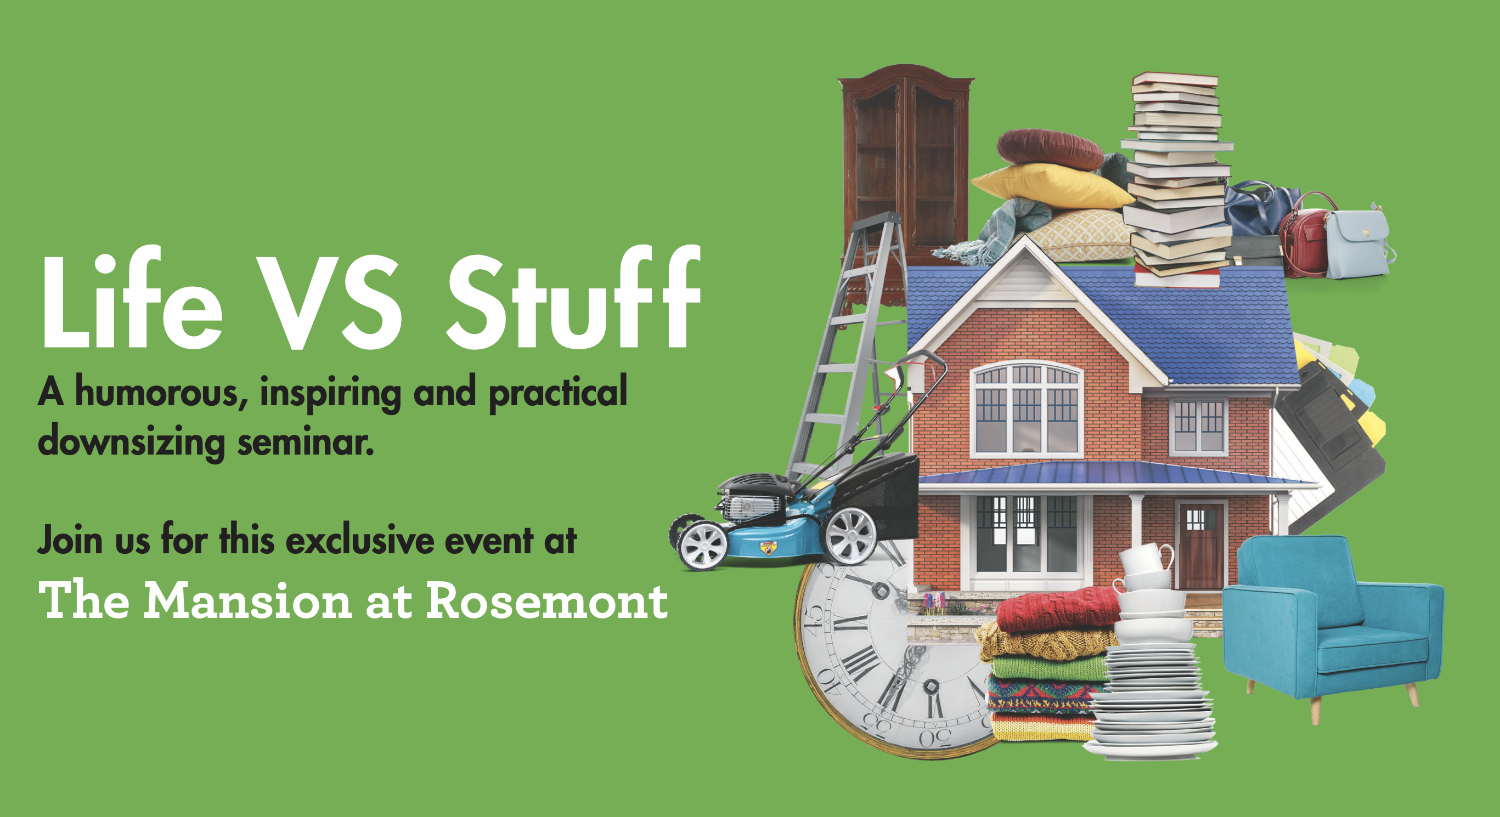 Life vs Stuff. A humorous, inspiring and practical downsizing seminar. Join us for this exclusive event at The Mansion at Rosemont.